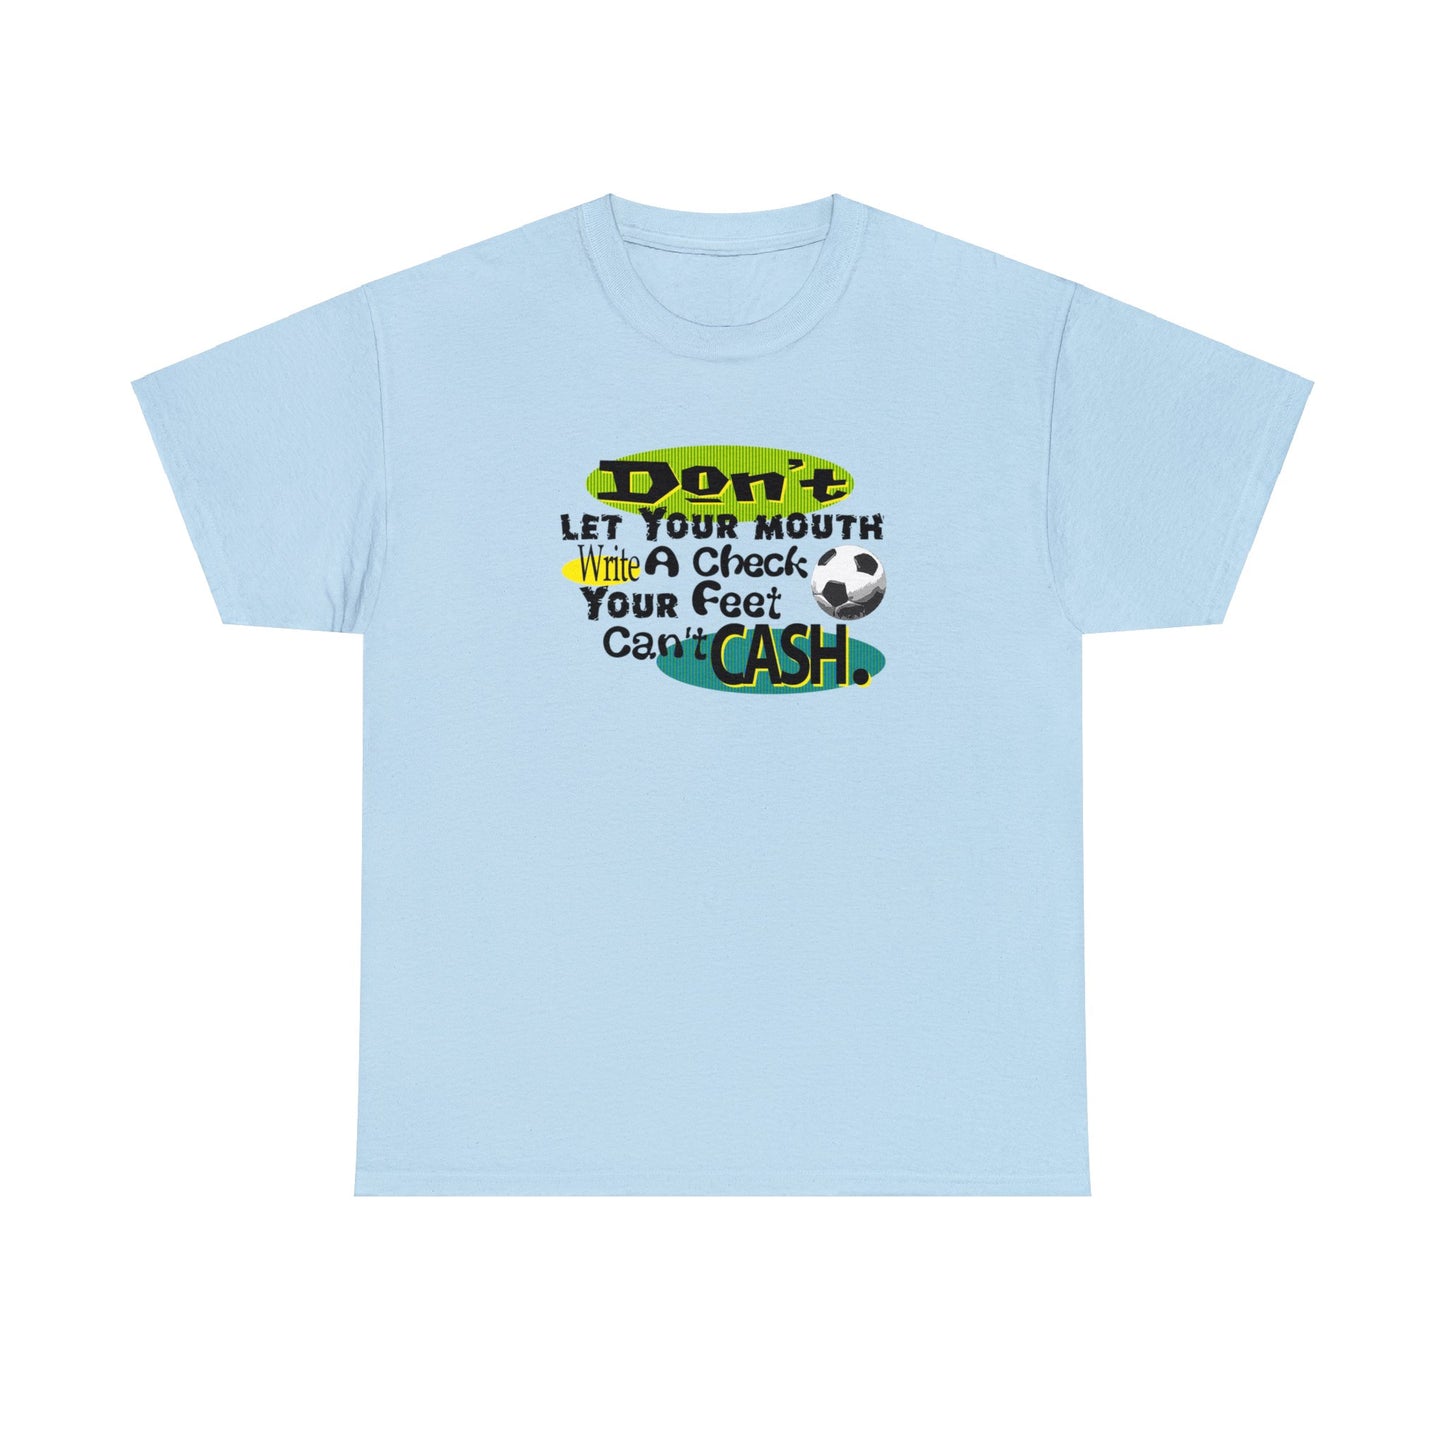 Don't Let Your Mouth Write a Check Your Feet Can't Catch, Funny Soccer T-Shirt, Soccer Ball, Whimsical Soccer T-Shirt, Fun Soccer Gift,